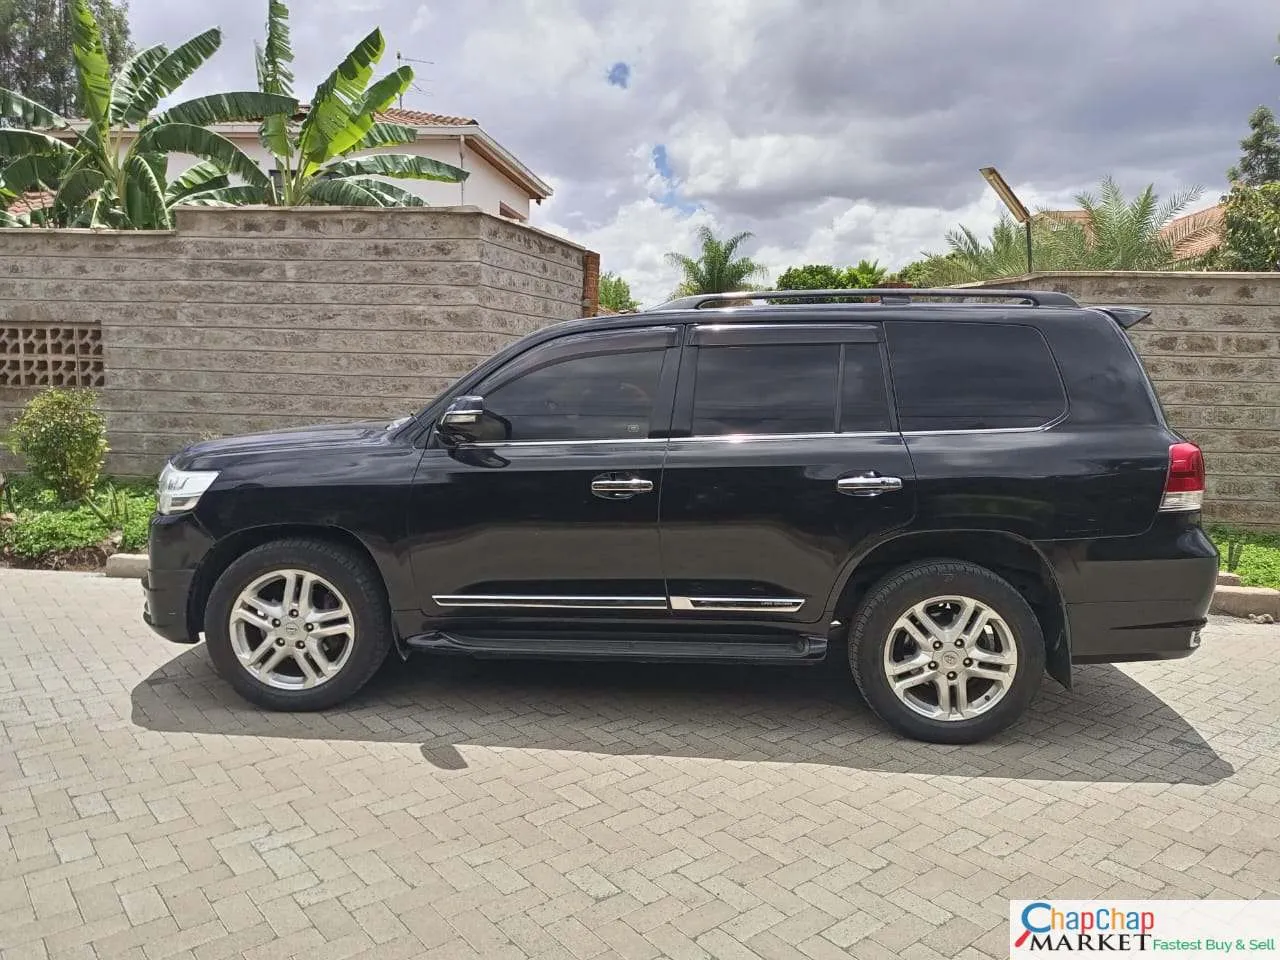 Cars Cars For Sale-Toyota V8 ZX 200 series SUNROOF LEATHER 2010 4M ONLY You Pay 40% Deposit Trade in OK EXCLUSIVE Toyota v8 for sale in kenya hire purchase installments landcruiser land cruiser 6